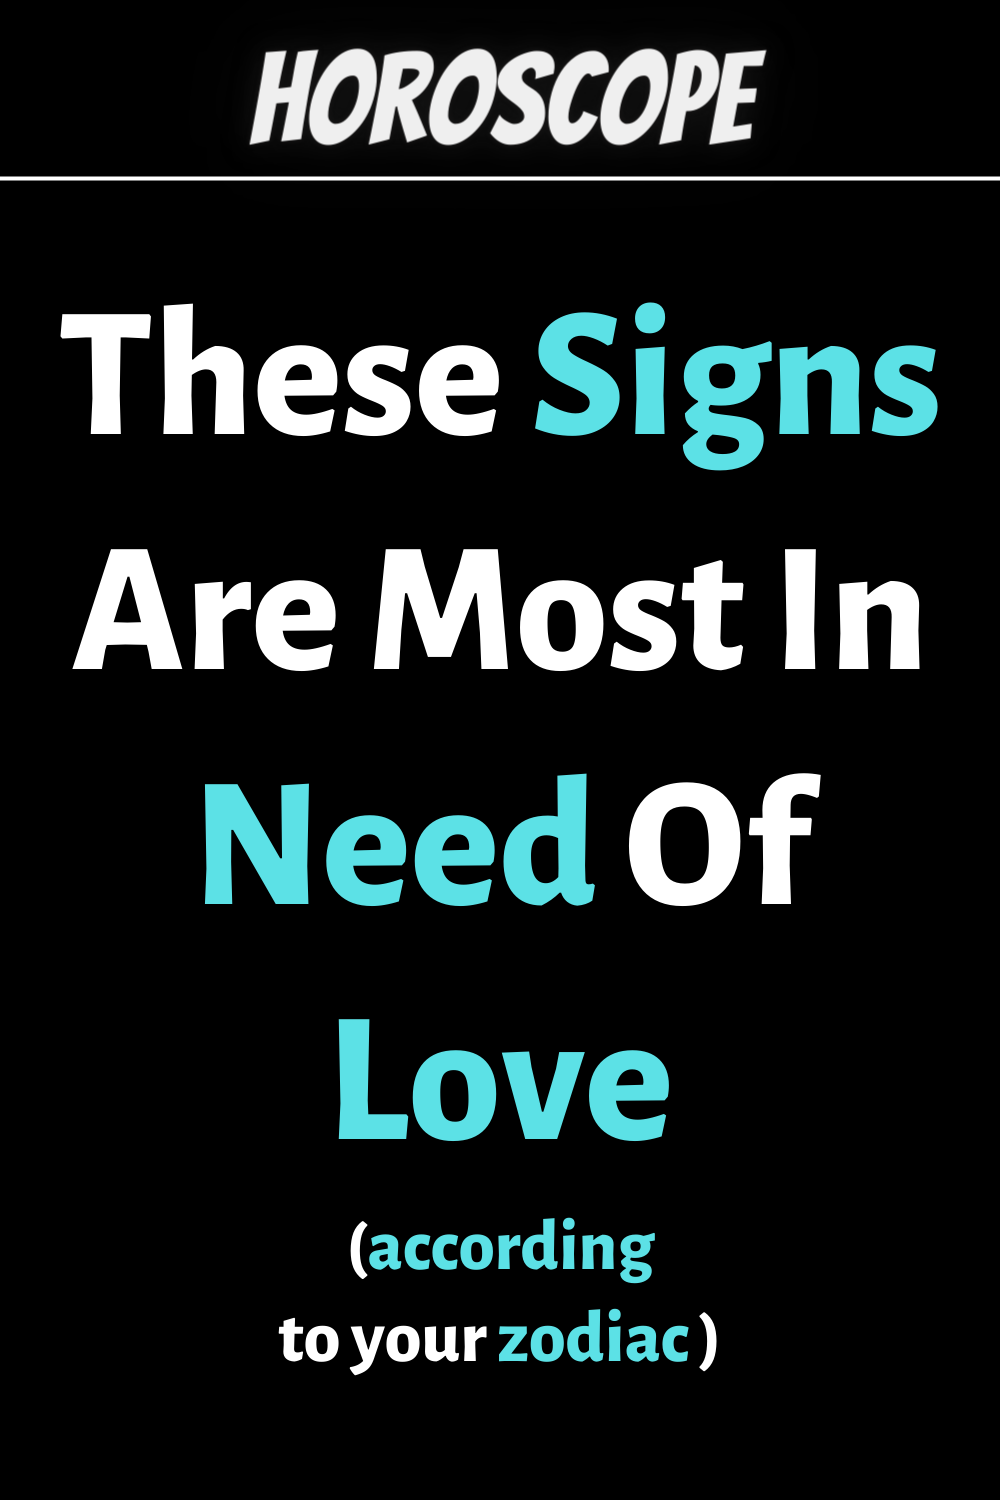 These Signs Are Most In Need Of Love